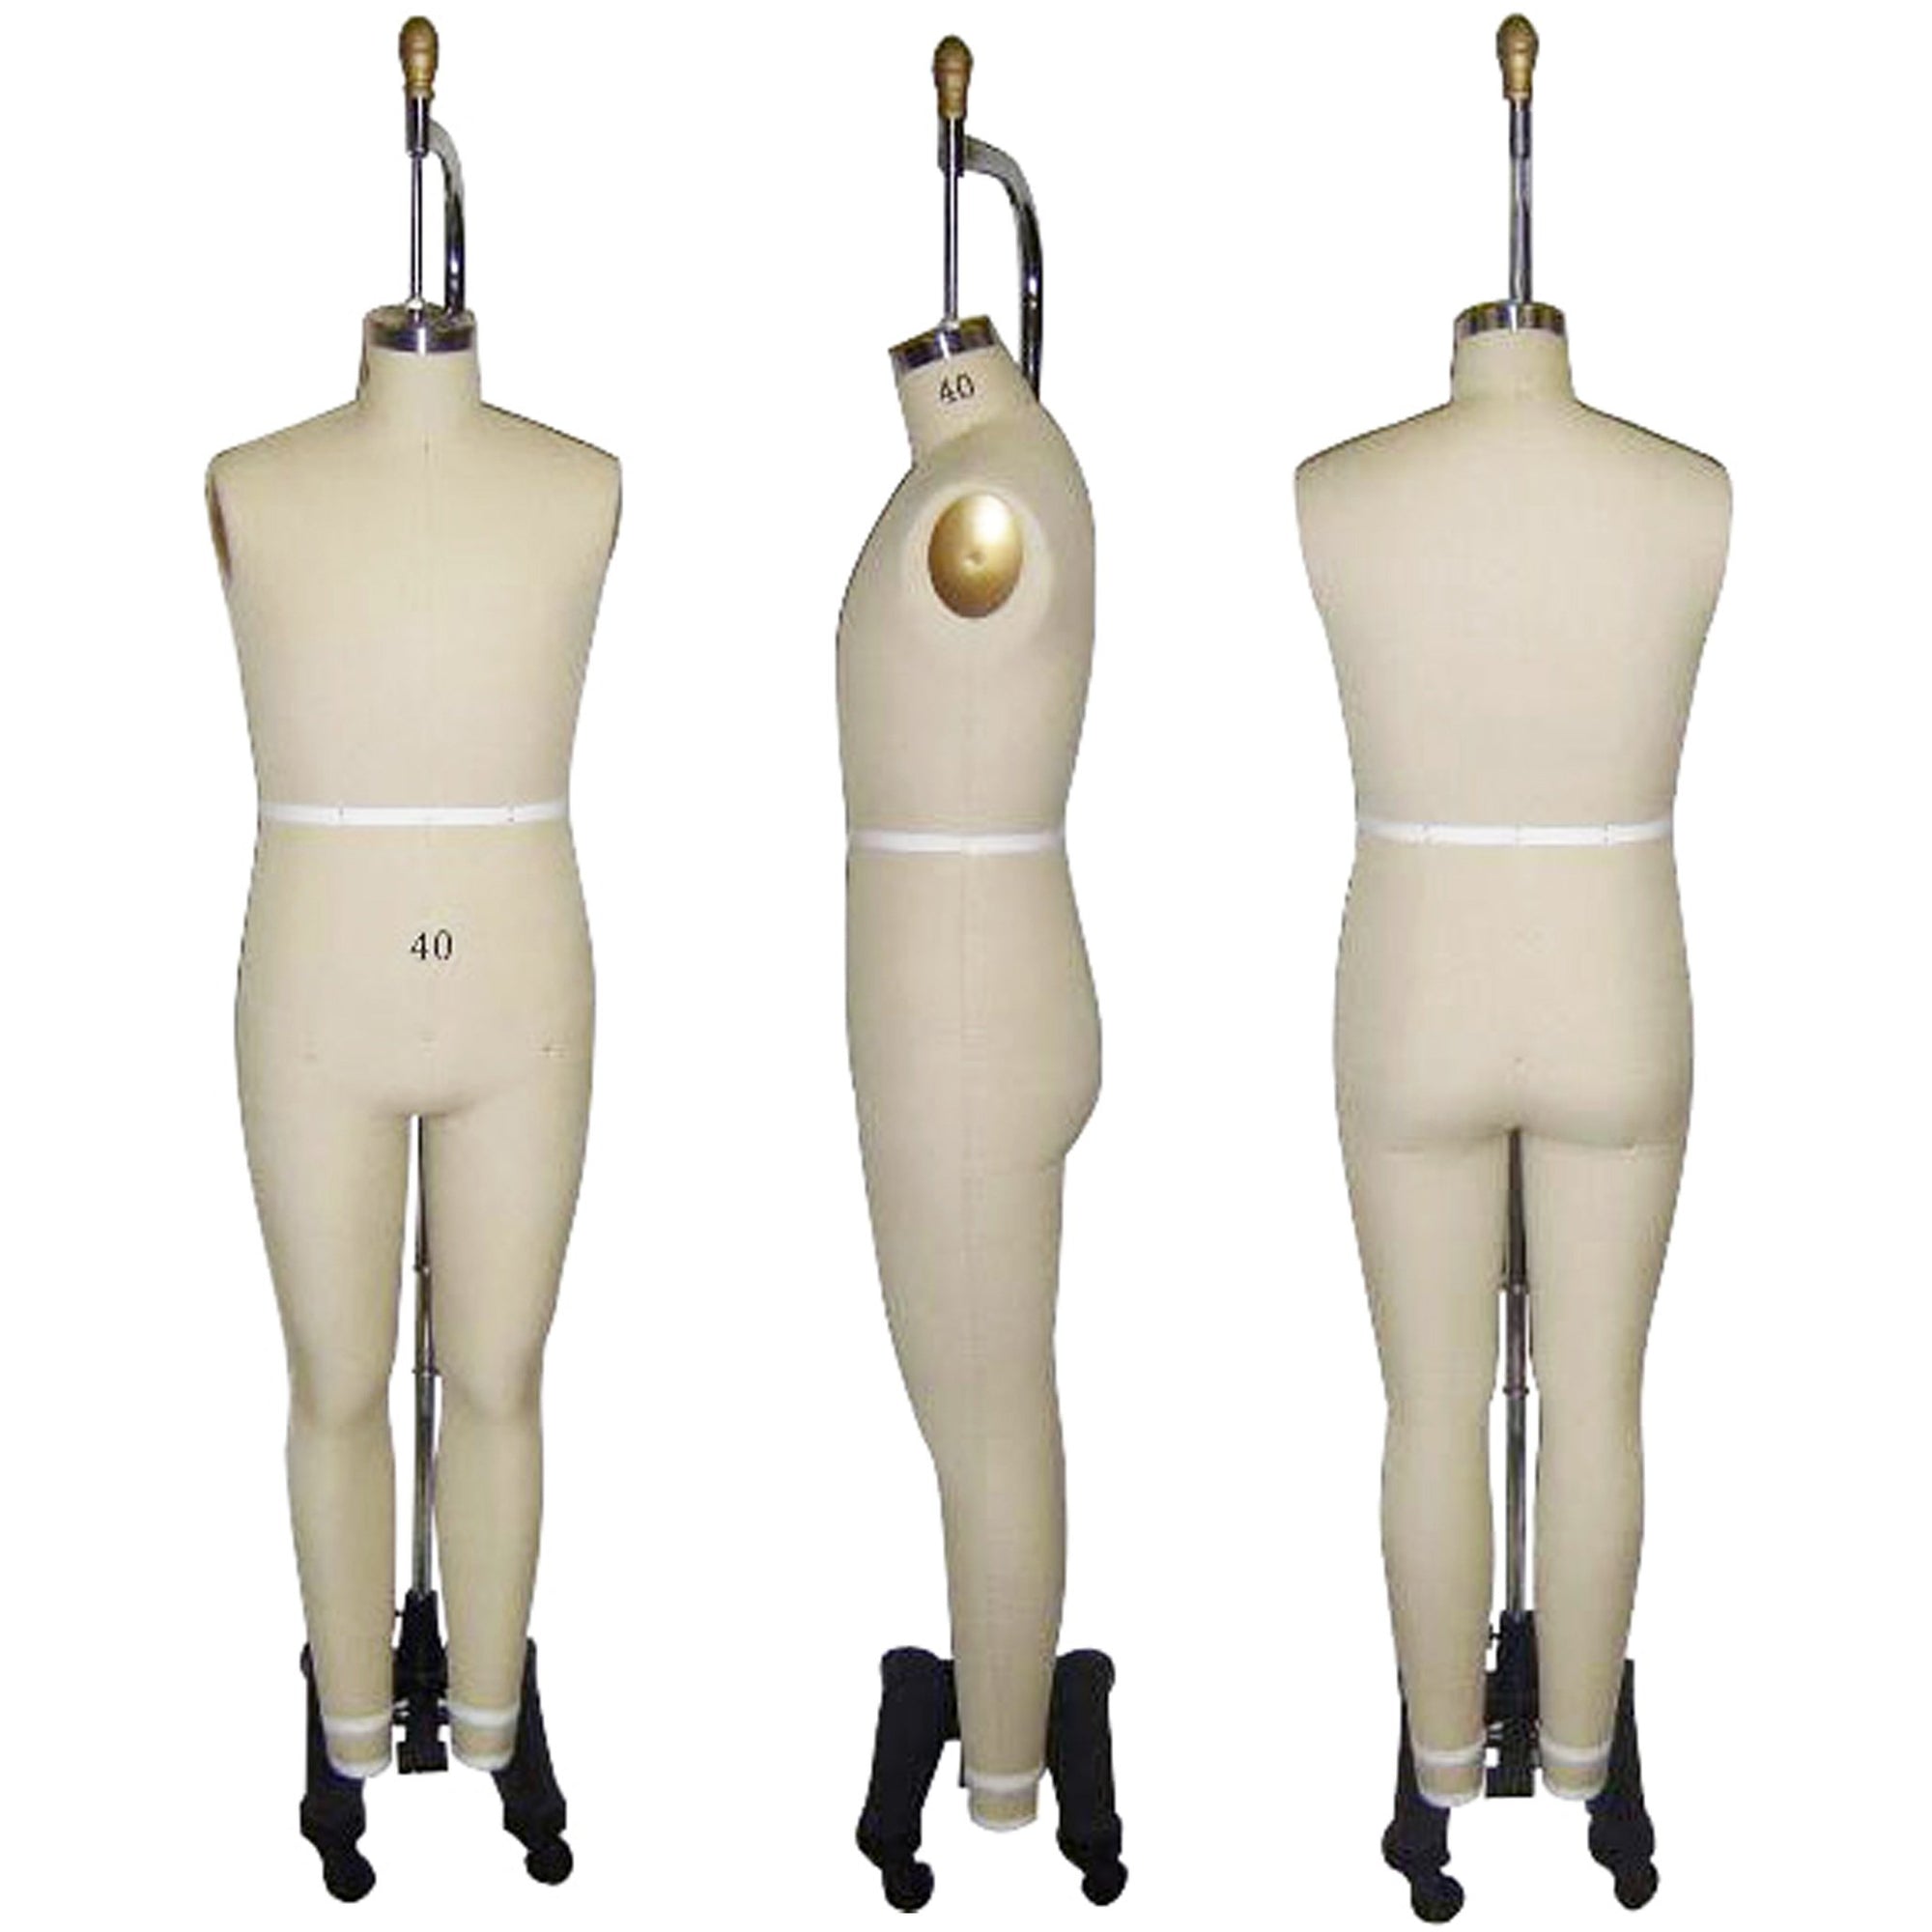 Male Full Body Professional Dress Form, sewing mannequin, seamstress mannequin